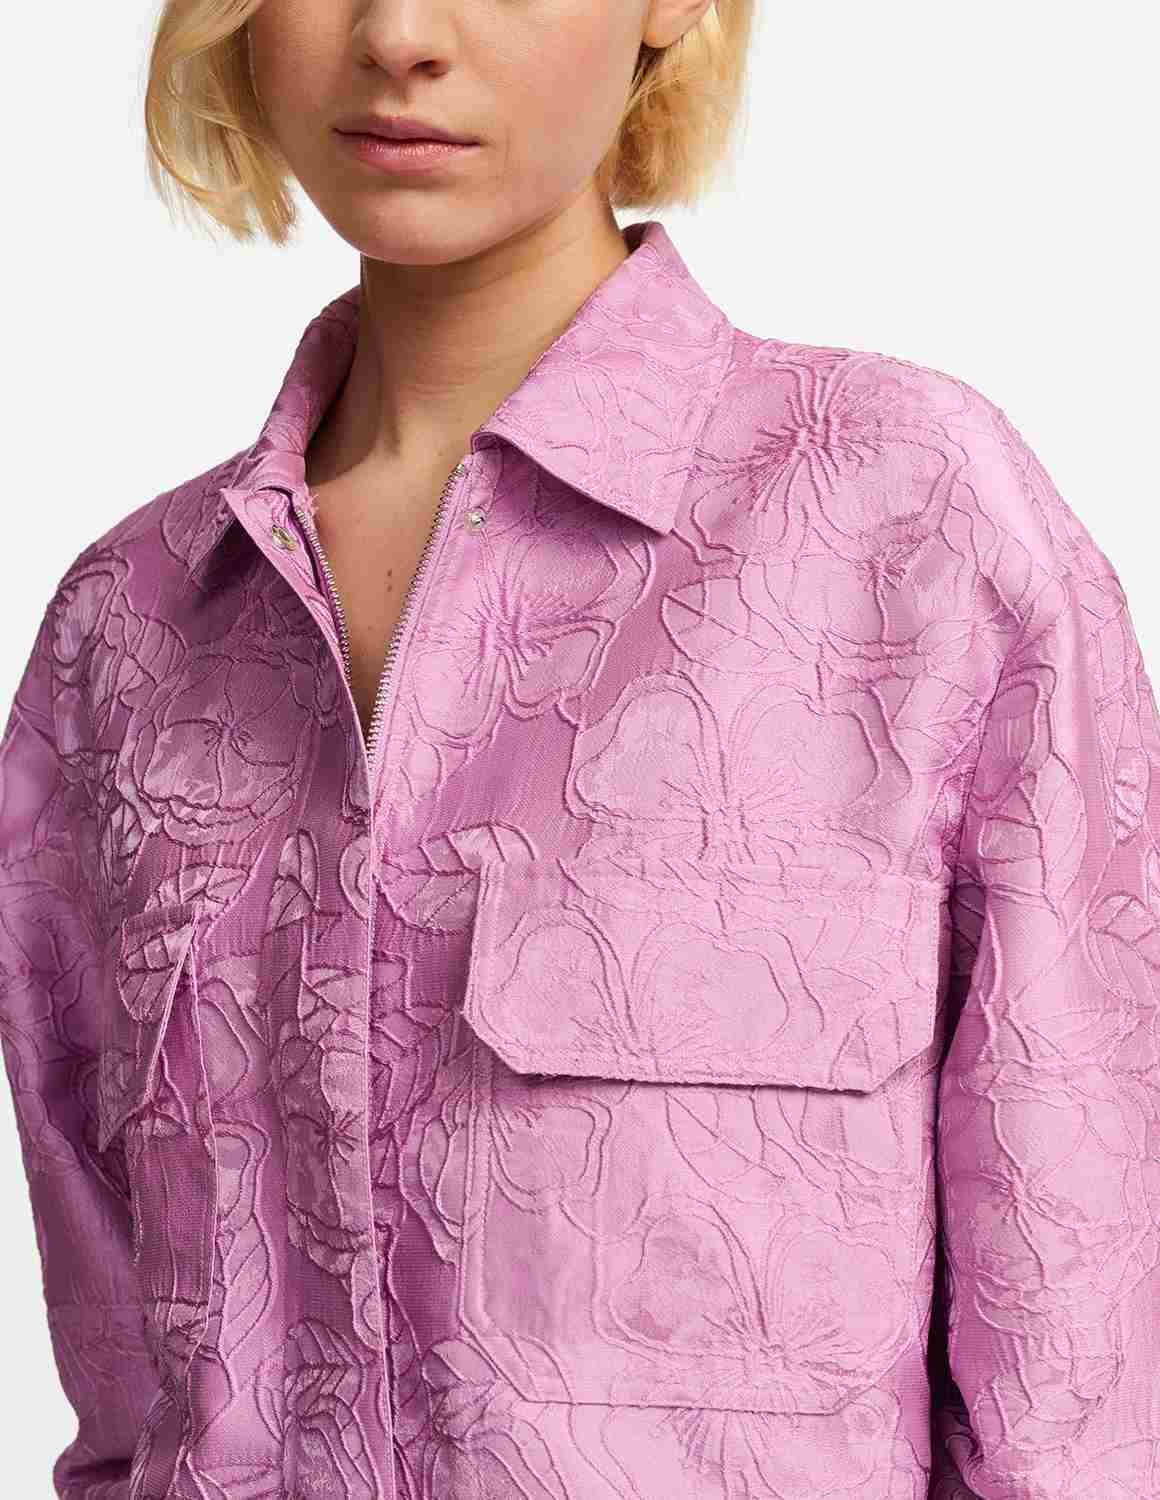 Fubious cropped jacket lilac by Essentiel Antwerp